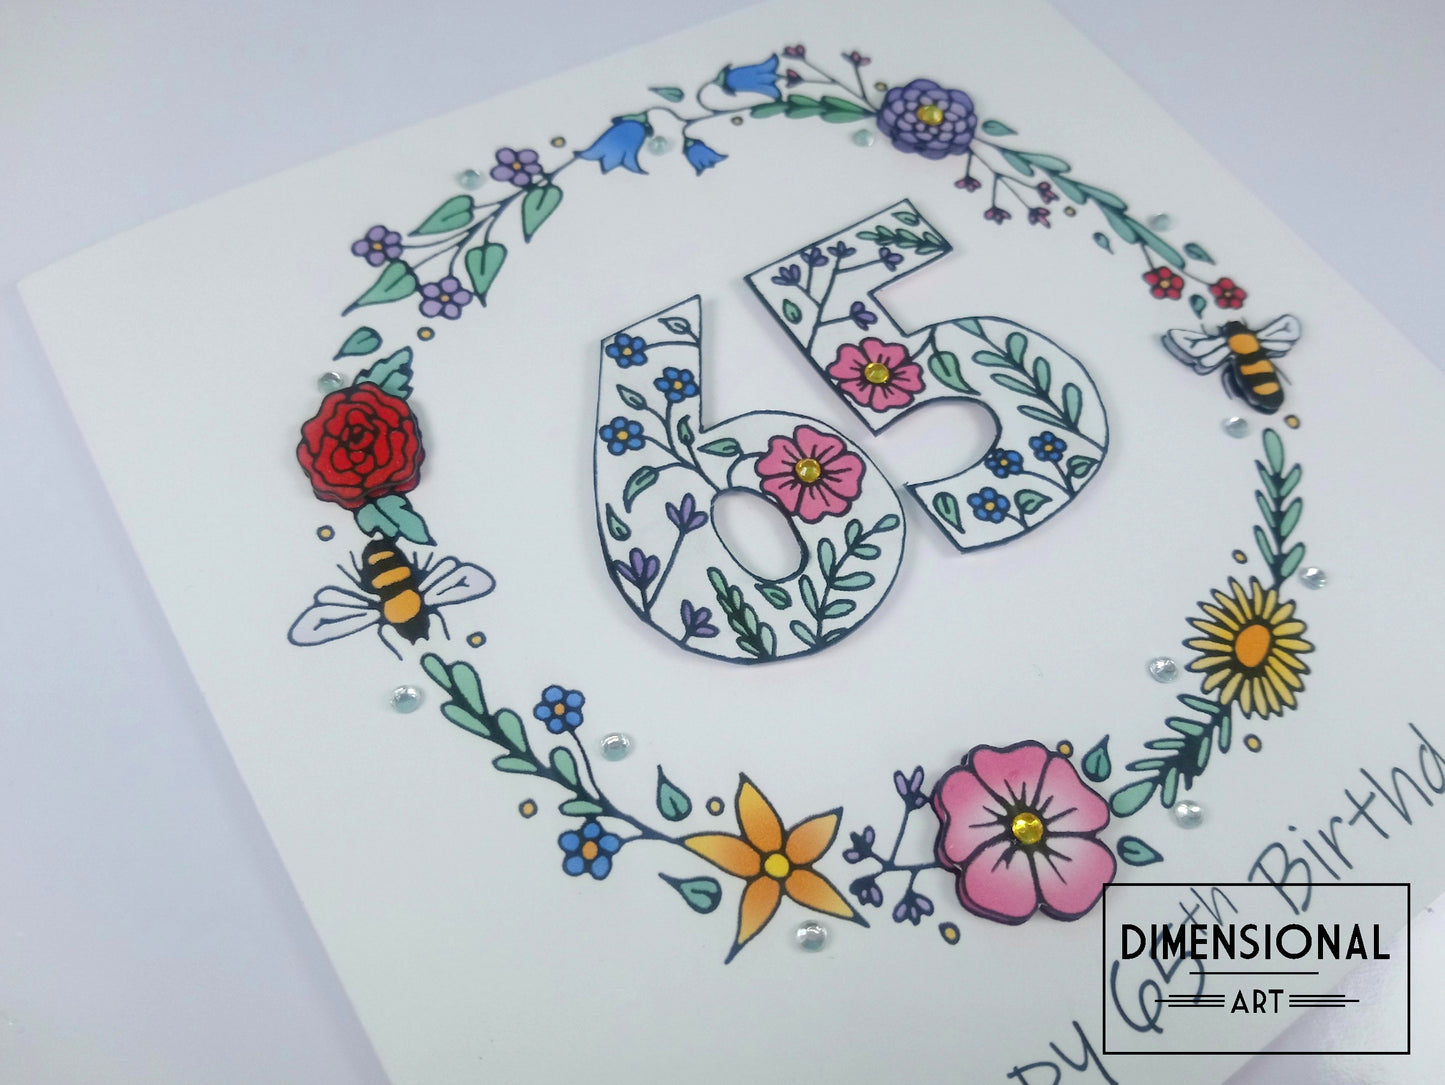 65th Flowers and Bees Birthday Card